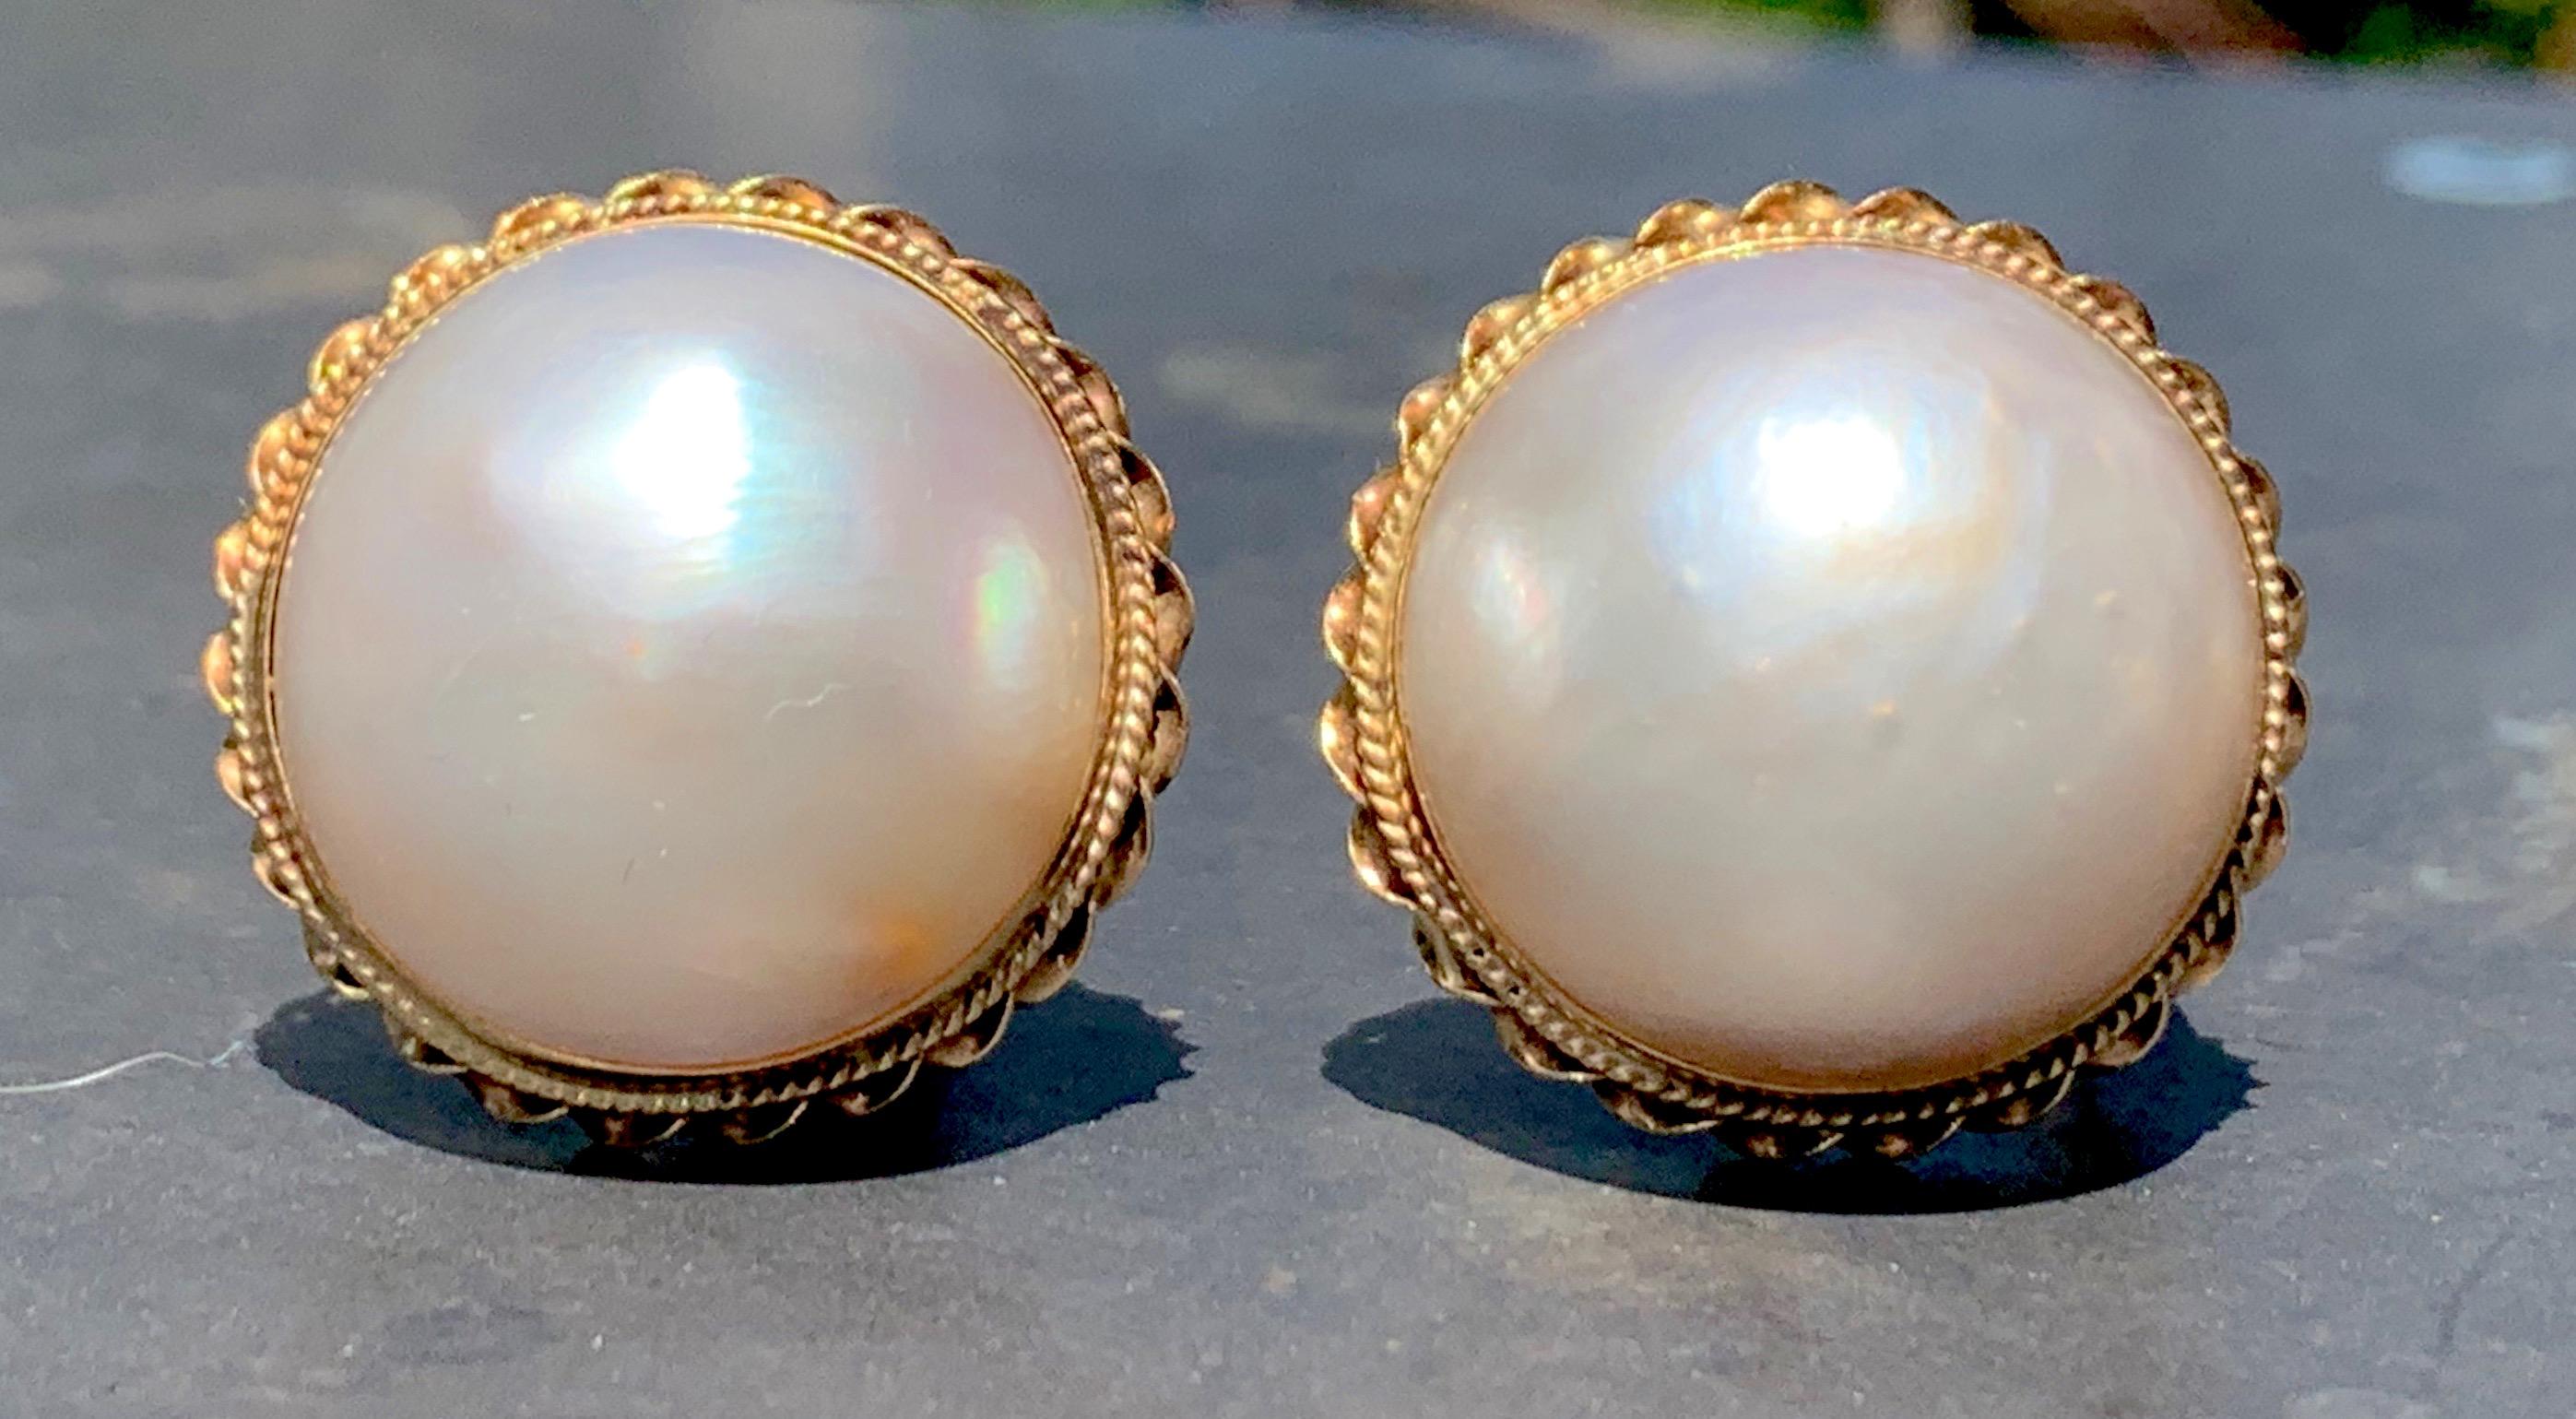 This elegant and wearable pair of ear clips features wonderful and large mabé pearls. The pearls are set in 14 karat yellow gold and decorated with a twisted gold wire border.